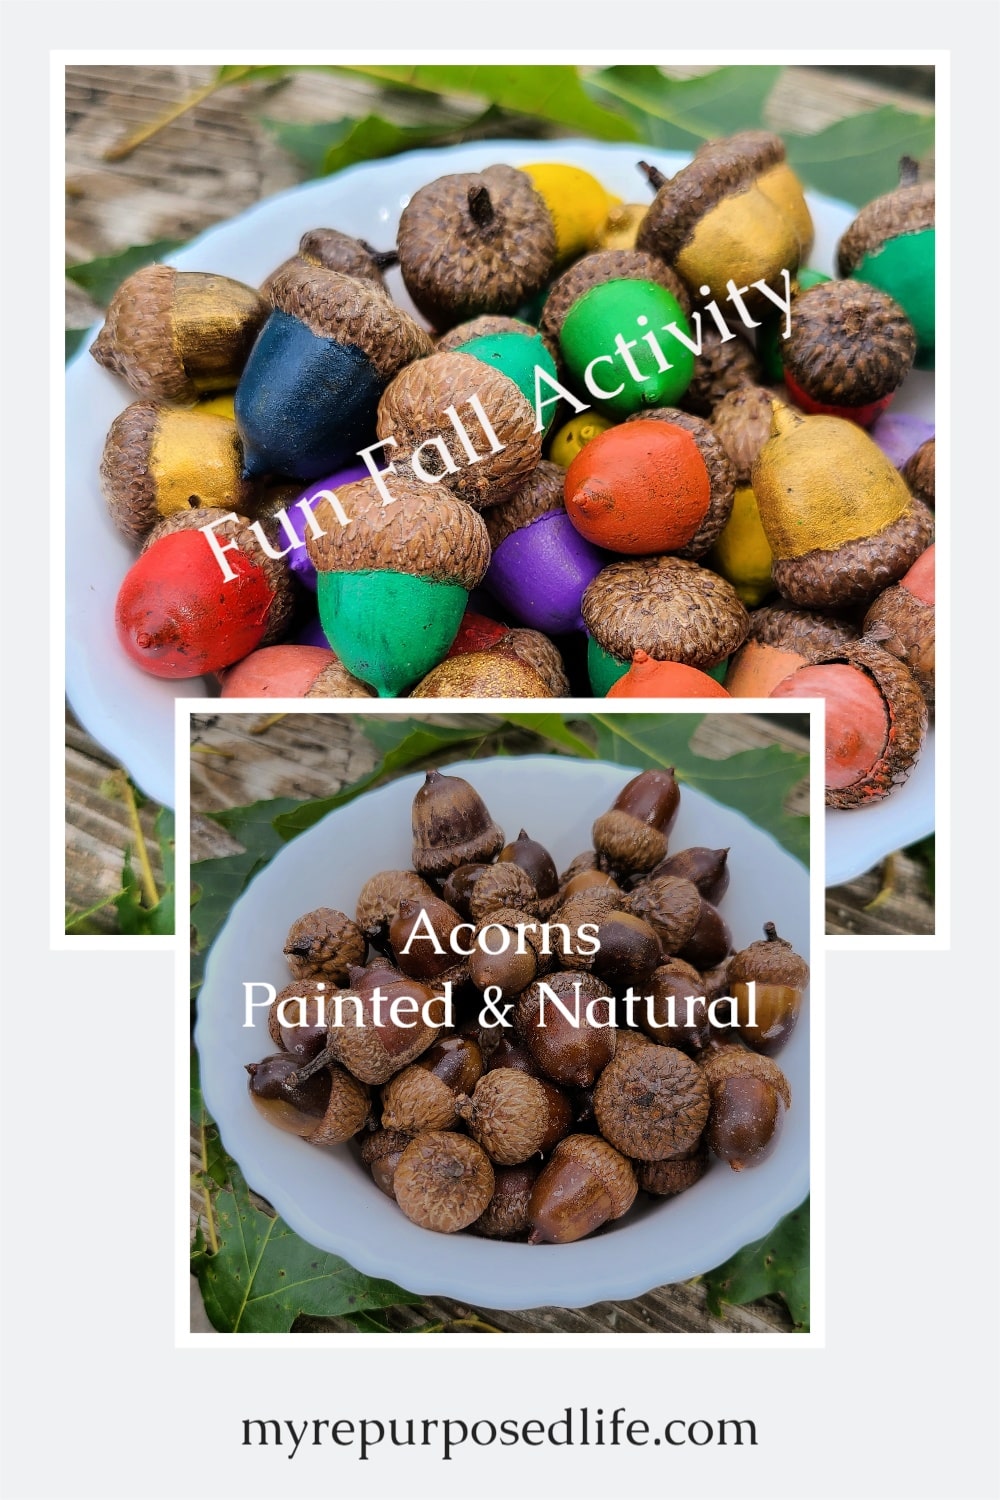 Have you ever seen painted acorns? I'm going to show you how to prep and paint acorns from your yard. Step by step details on drying, baking, painting and sealing. A great Fall decor project. #MyRepurposedLife #repurposed #acorns #fall #decor via @repurposedlife